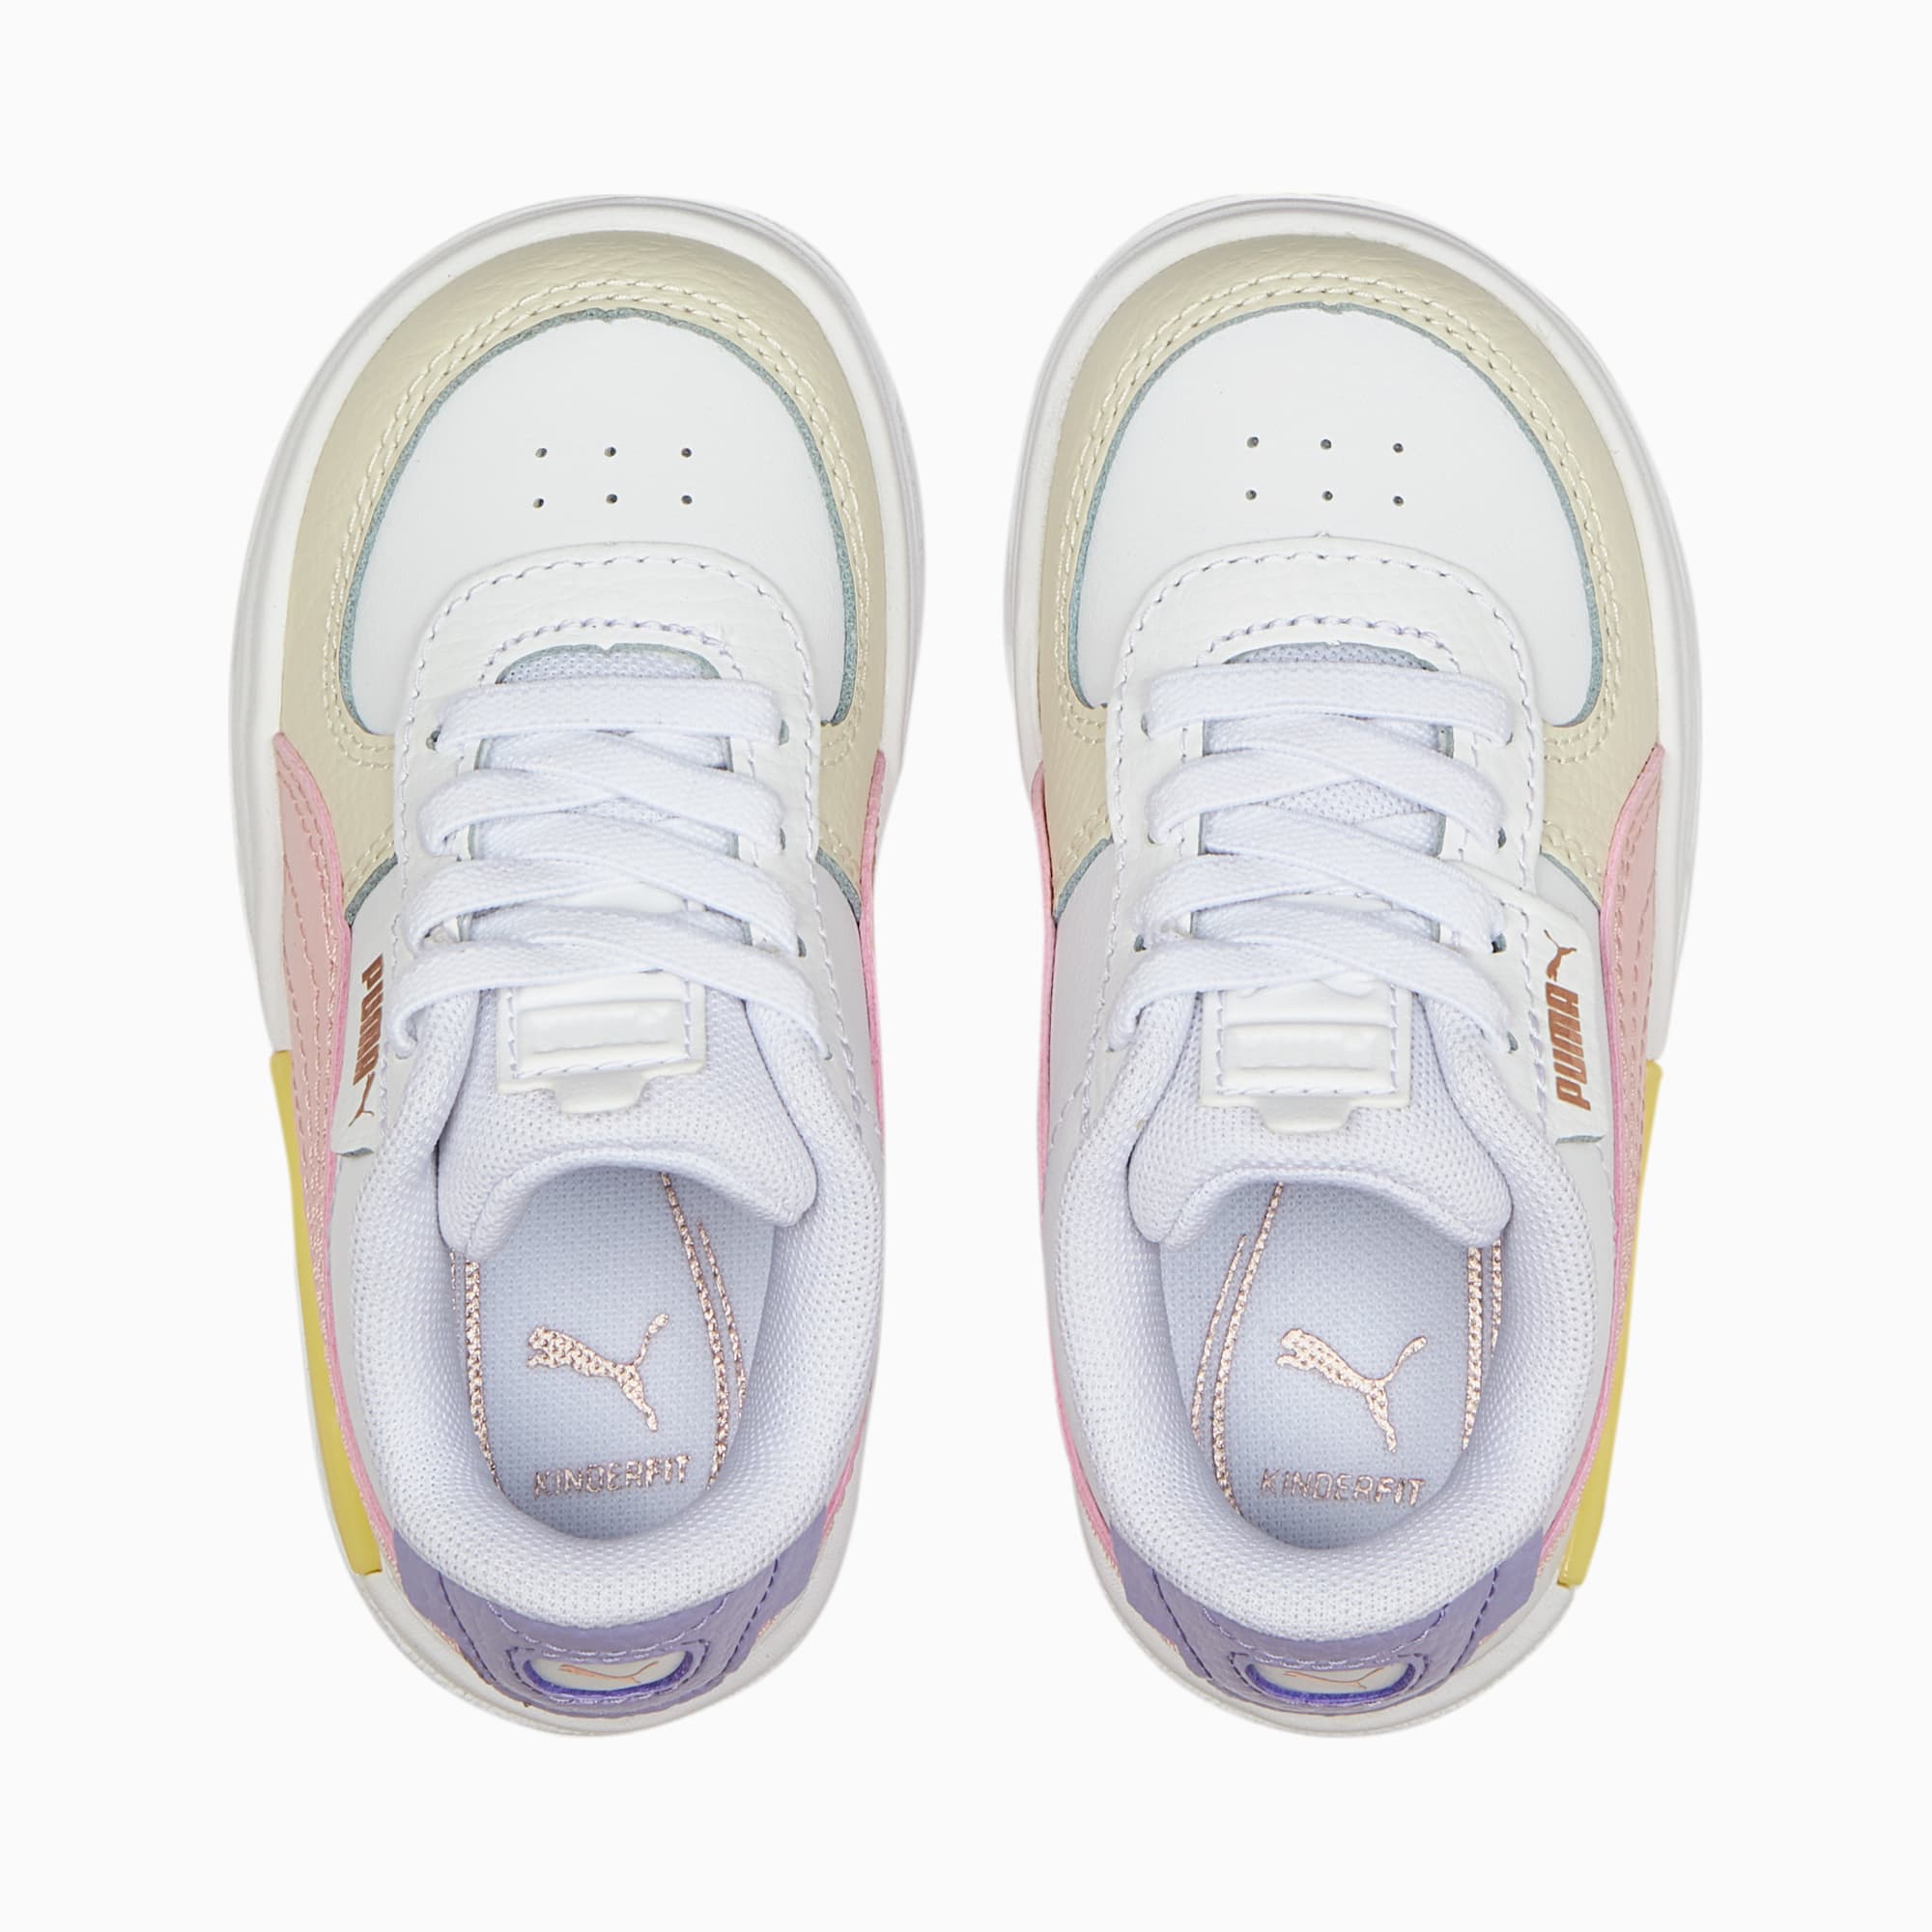 Cali Dream Pastel Toddlers' Shoes